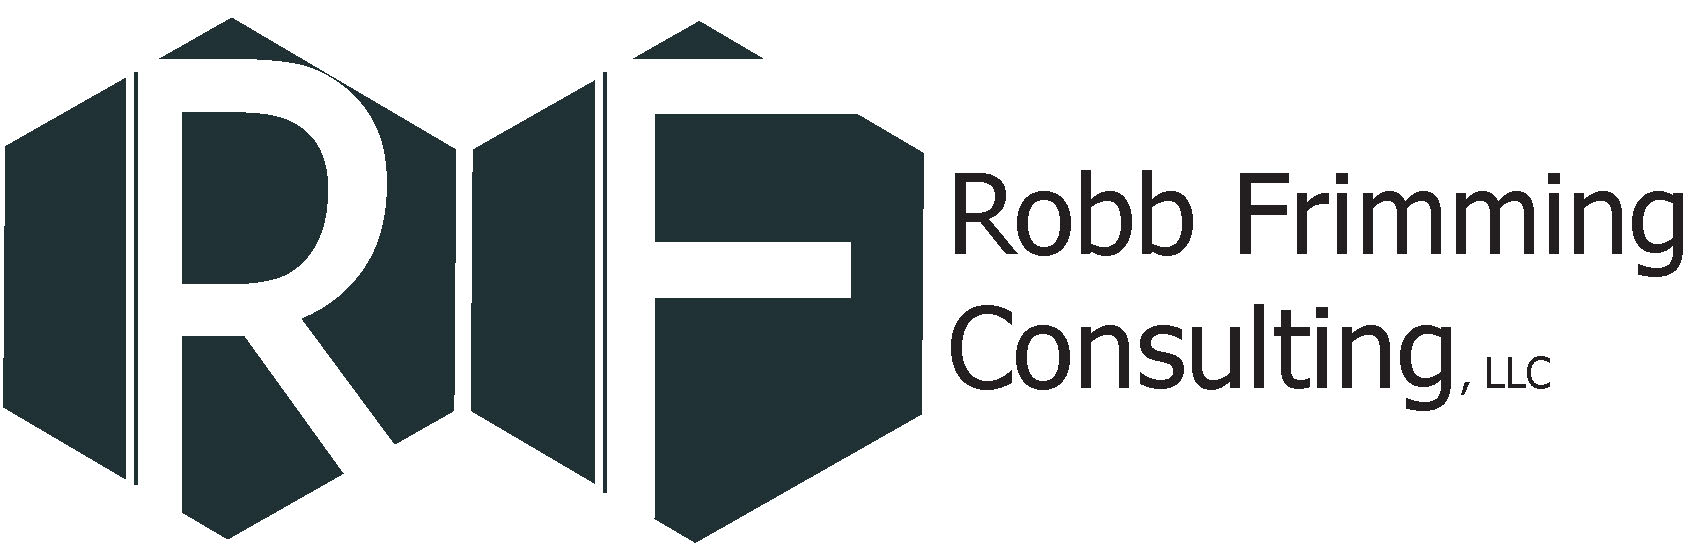 Robb Frimming Consulting